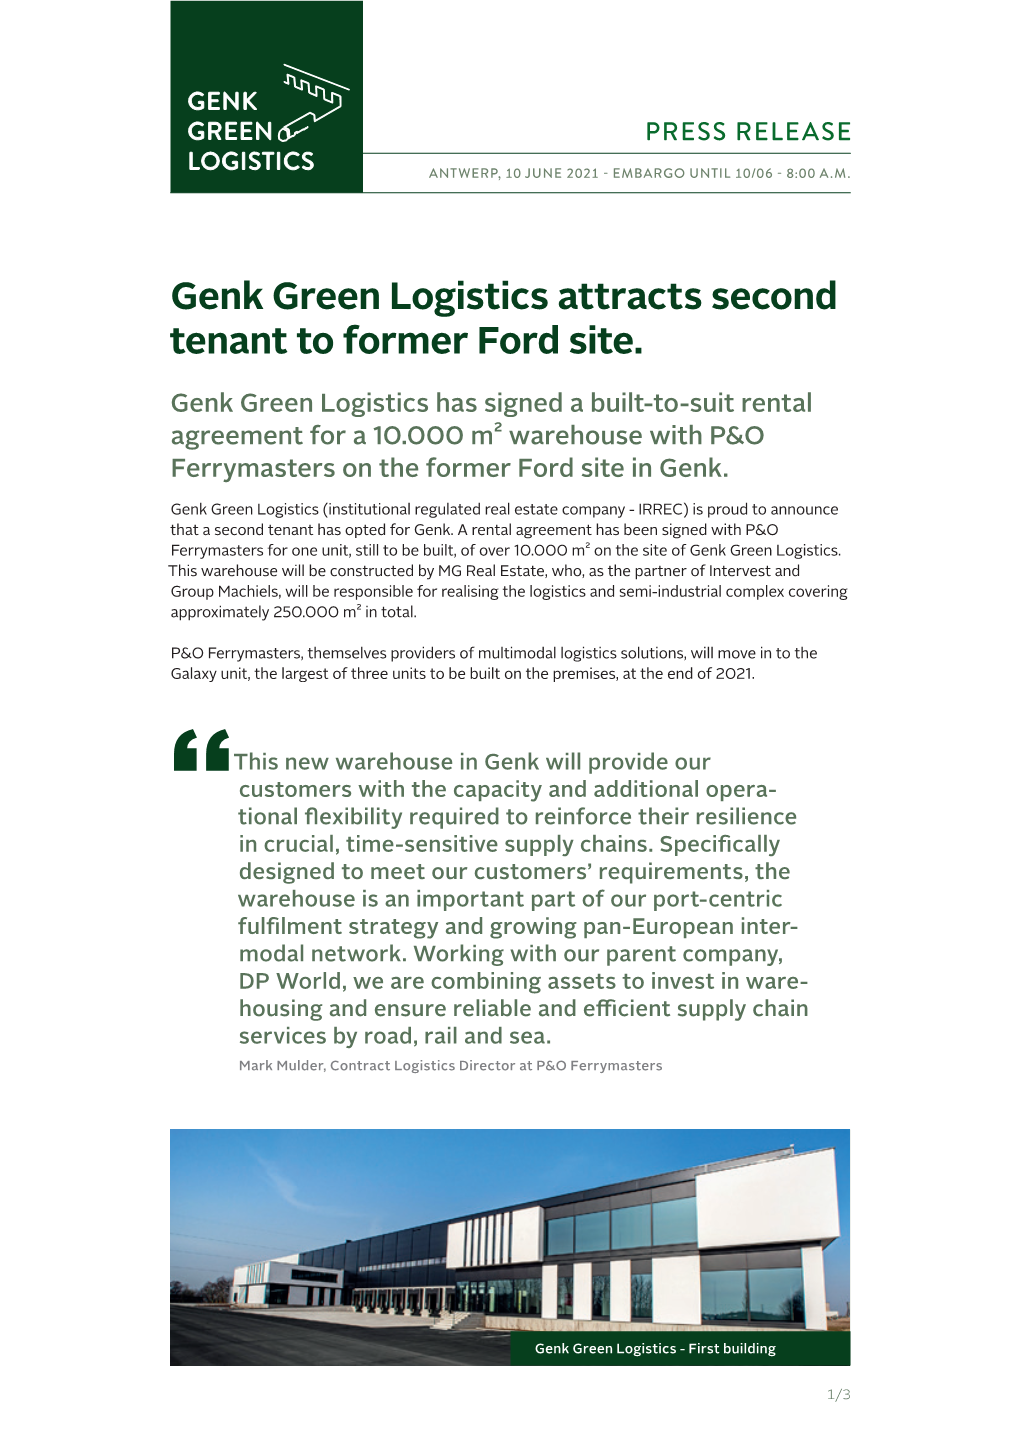 Genk Green Logistics Attracts Second Tenant to Former Ford Site